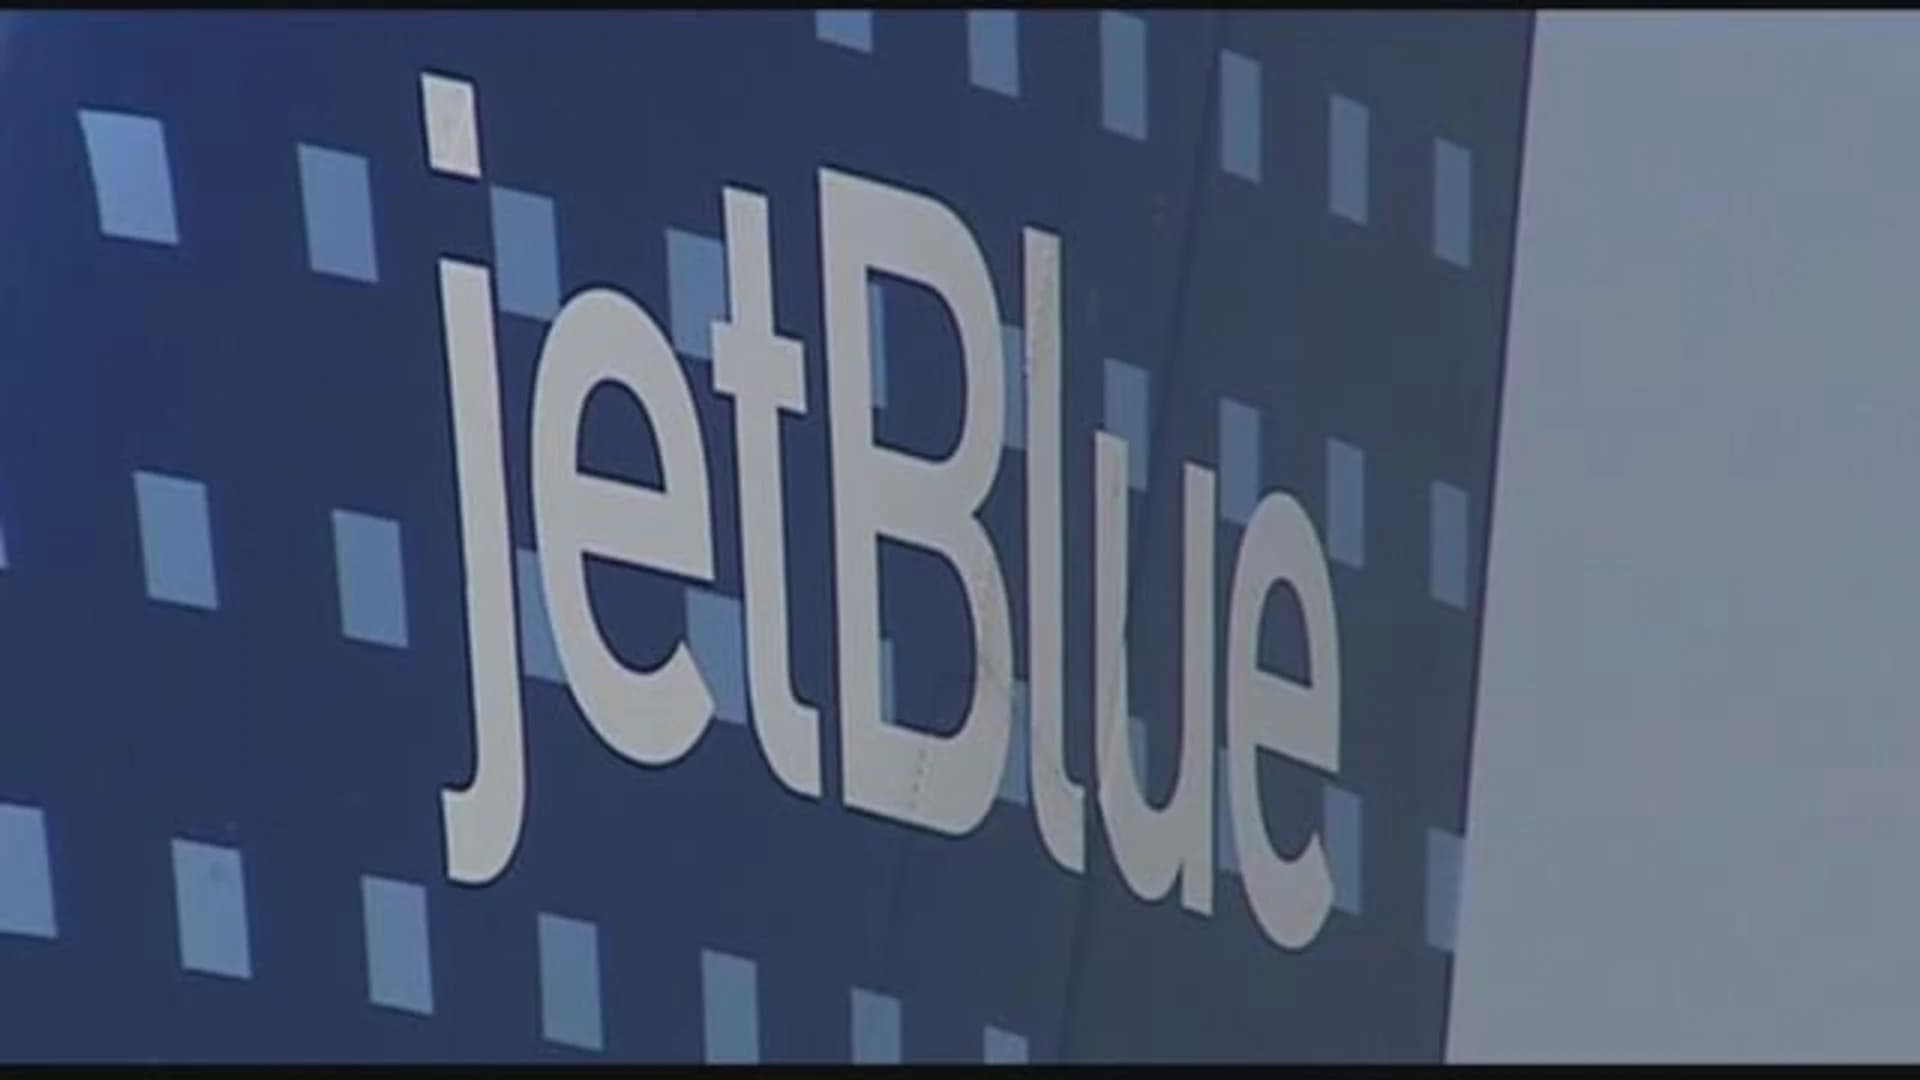 JetBlue apologizes for JFK Airport display that honored convicted killer